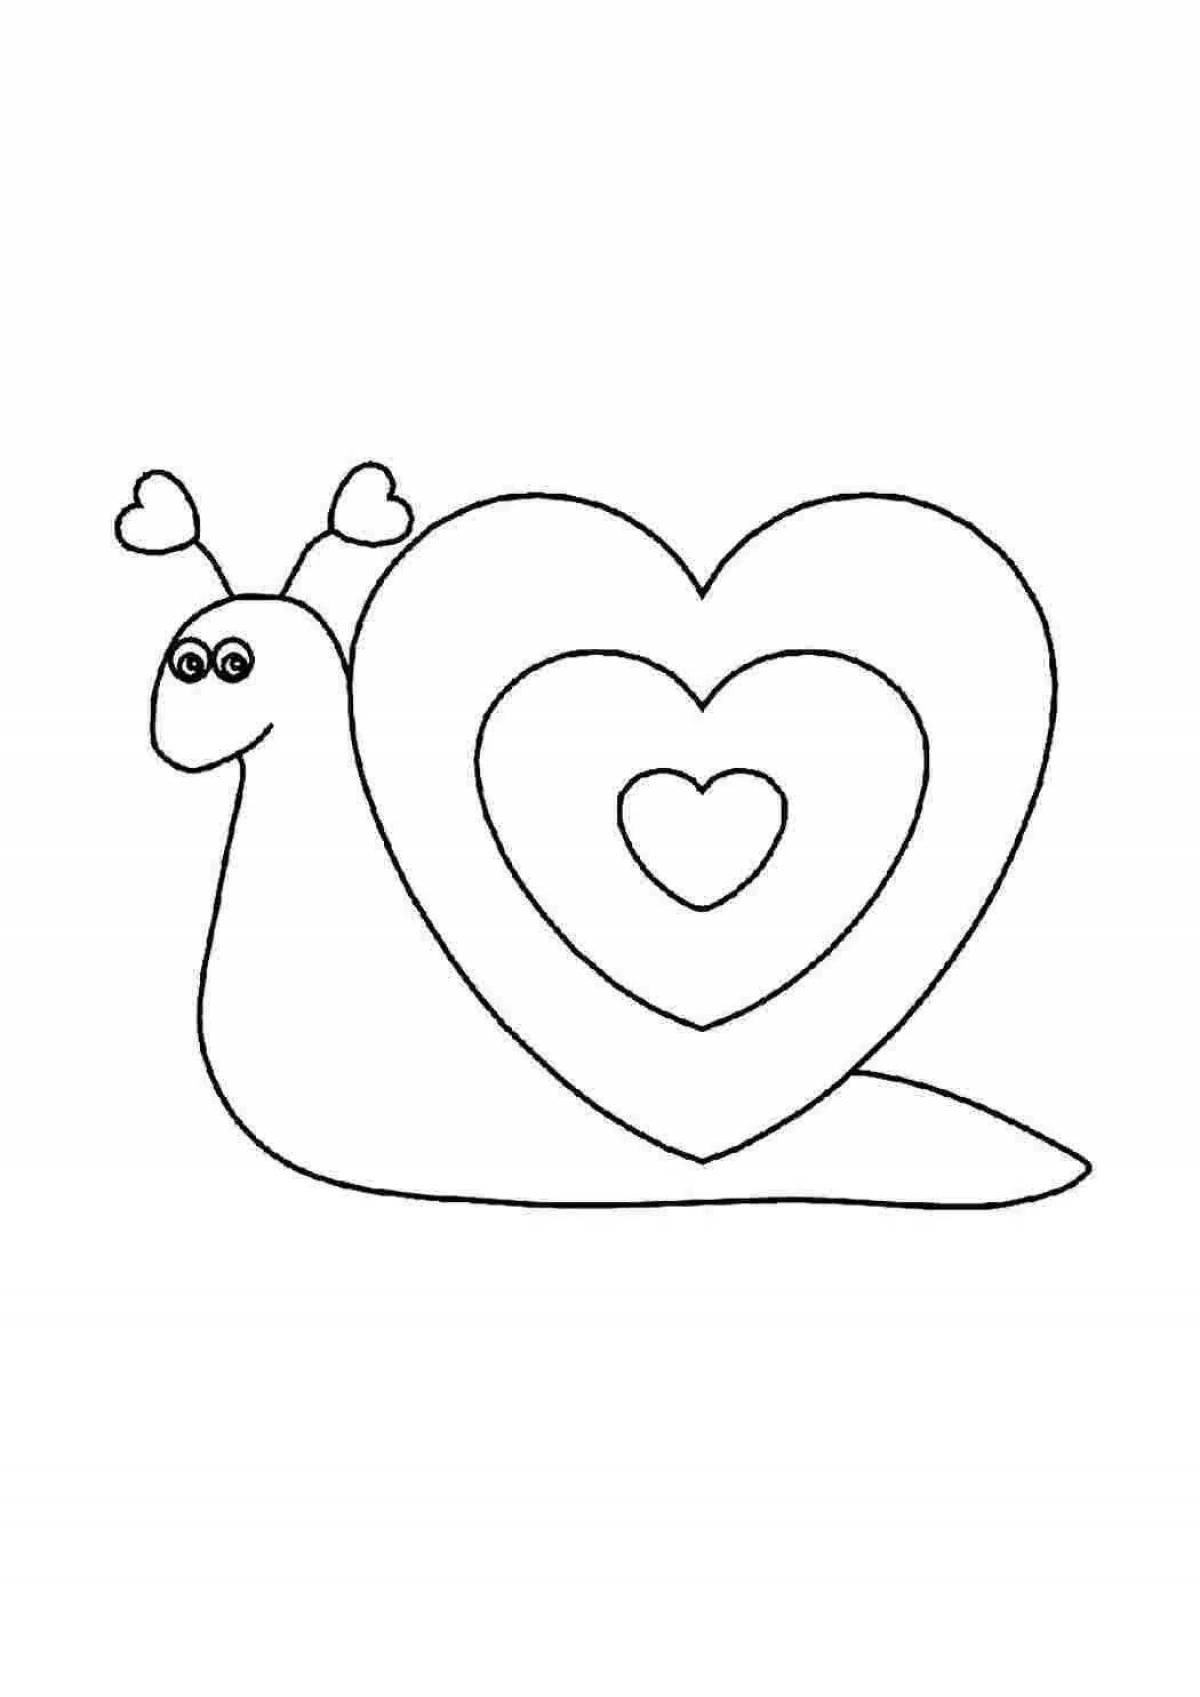 Shining heart coloring book for 3-4 year olds